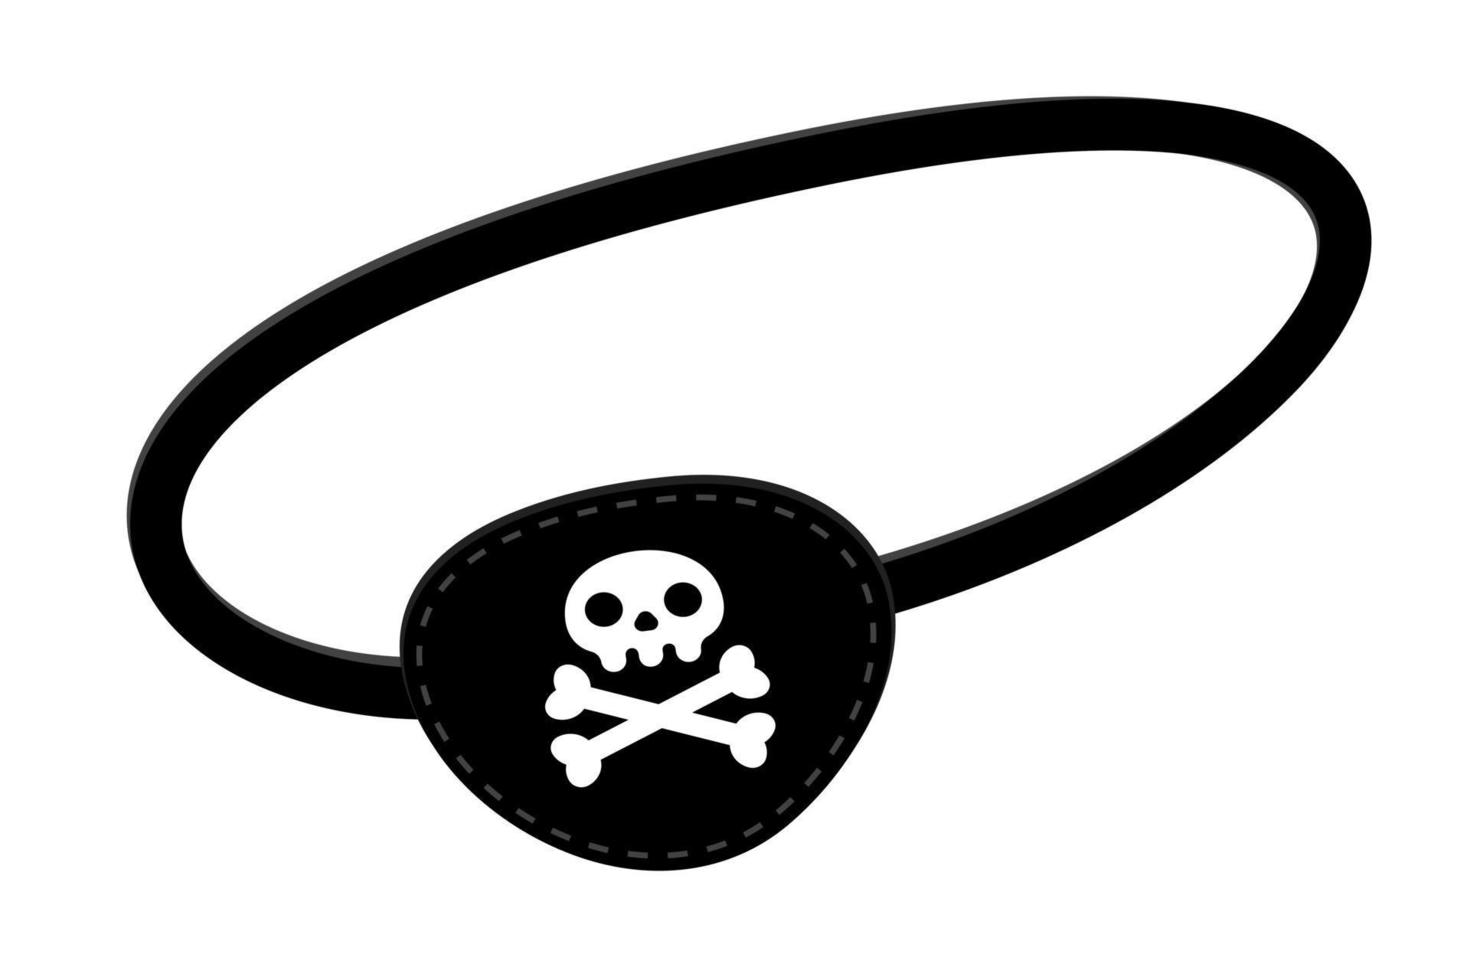 Pirate eye patch icon sign flat style design vector illustration isolated on white background.